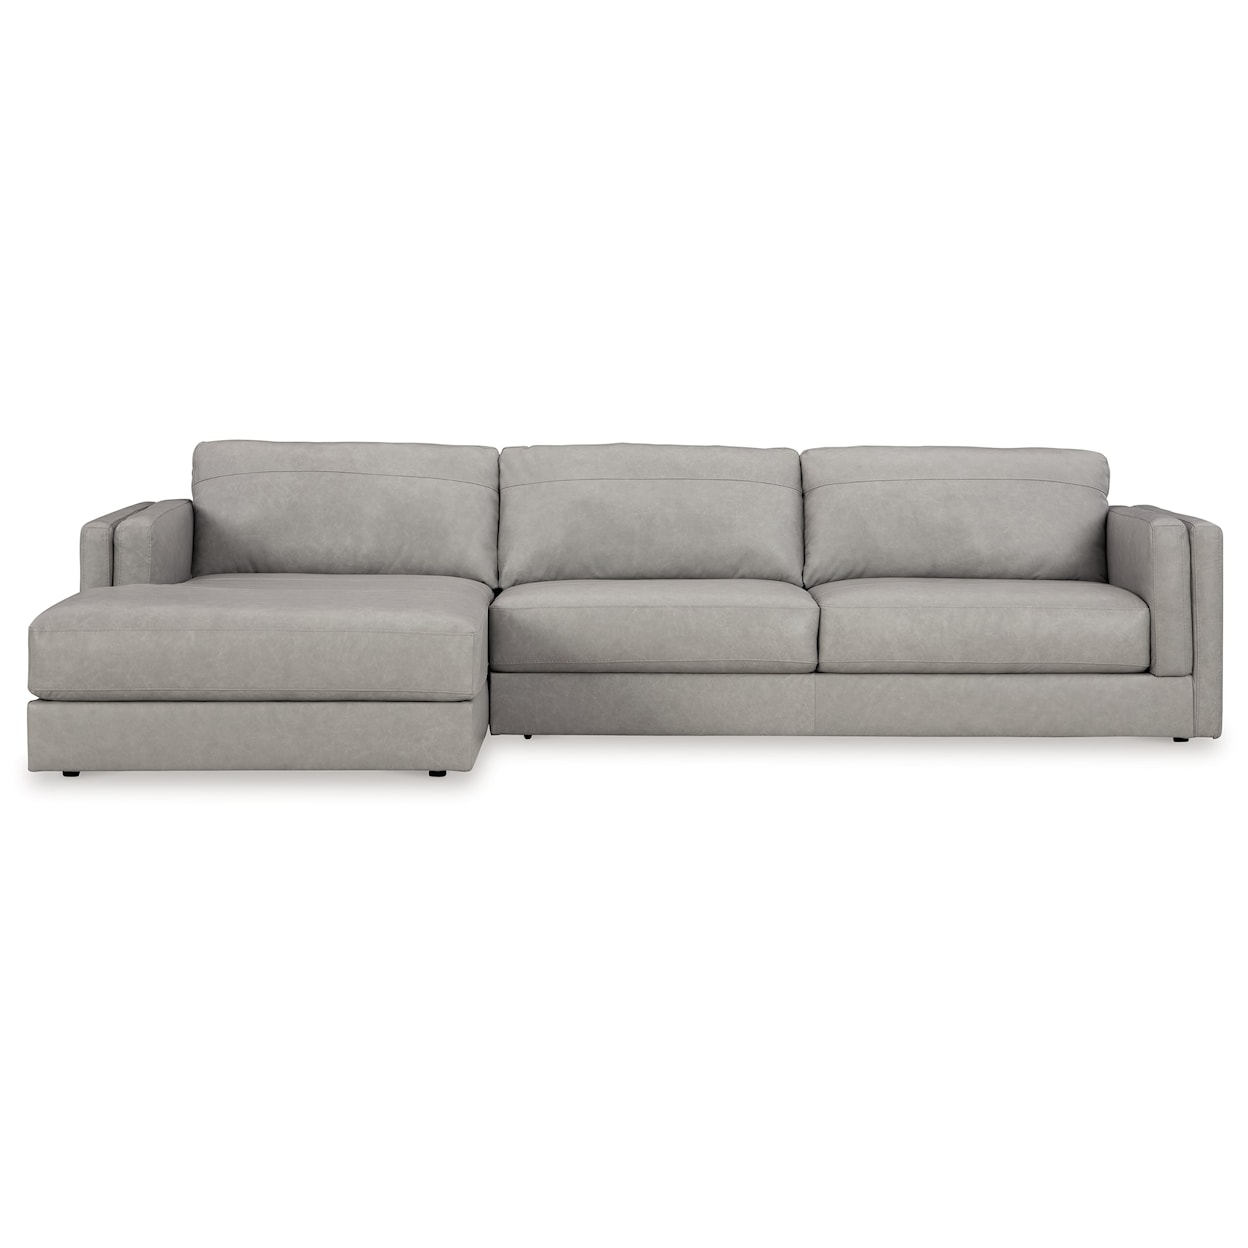 Michael Alan Select Amiata 2-Piece Sectional With Chaise